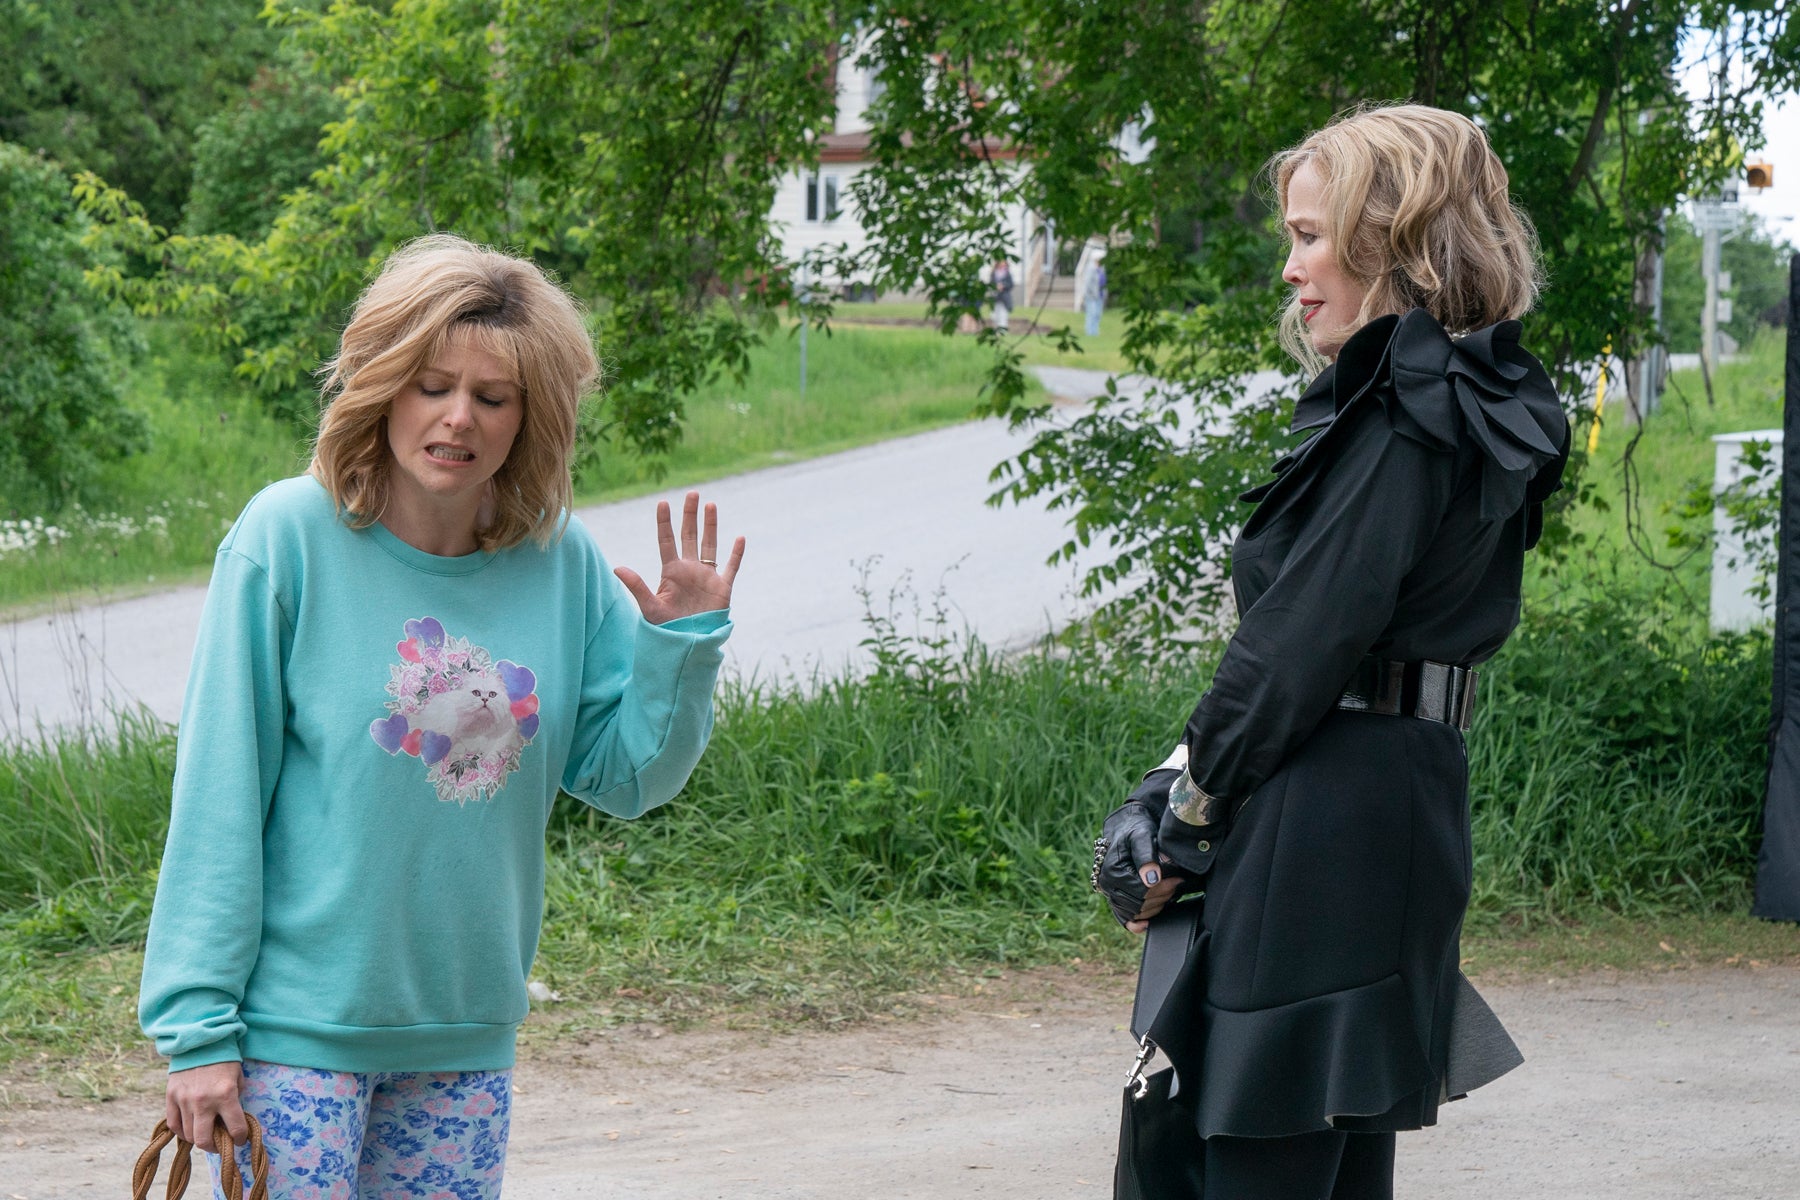 Jocelyn Schitt looks distressed while holding up a hand to Moira Rose as both women talk outside next to a road.